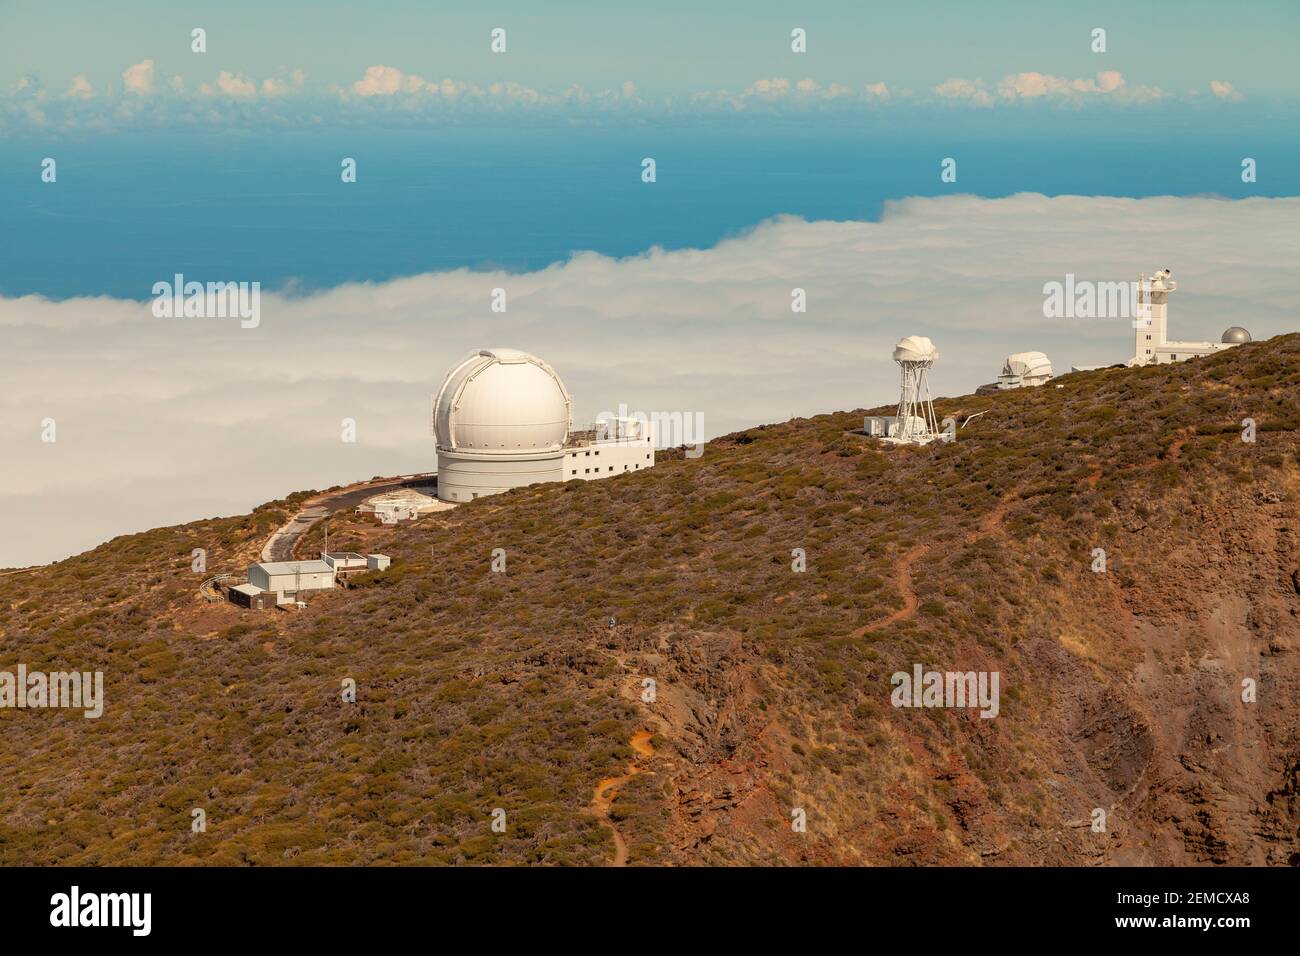 La Palma, Spain - November 1, 2016: Overview of some of the telescopes at the Roque de los Muchachos Observatory, ORM, astronomical observatory locate Stock Photo